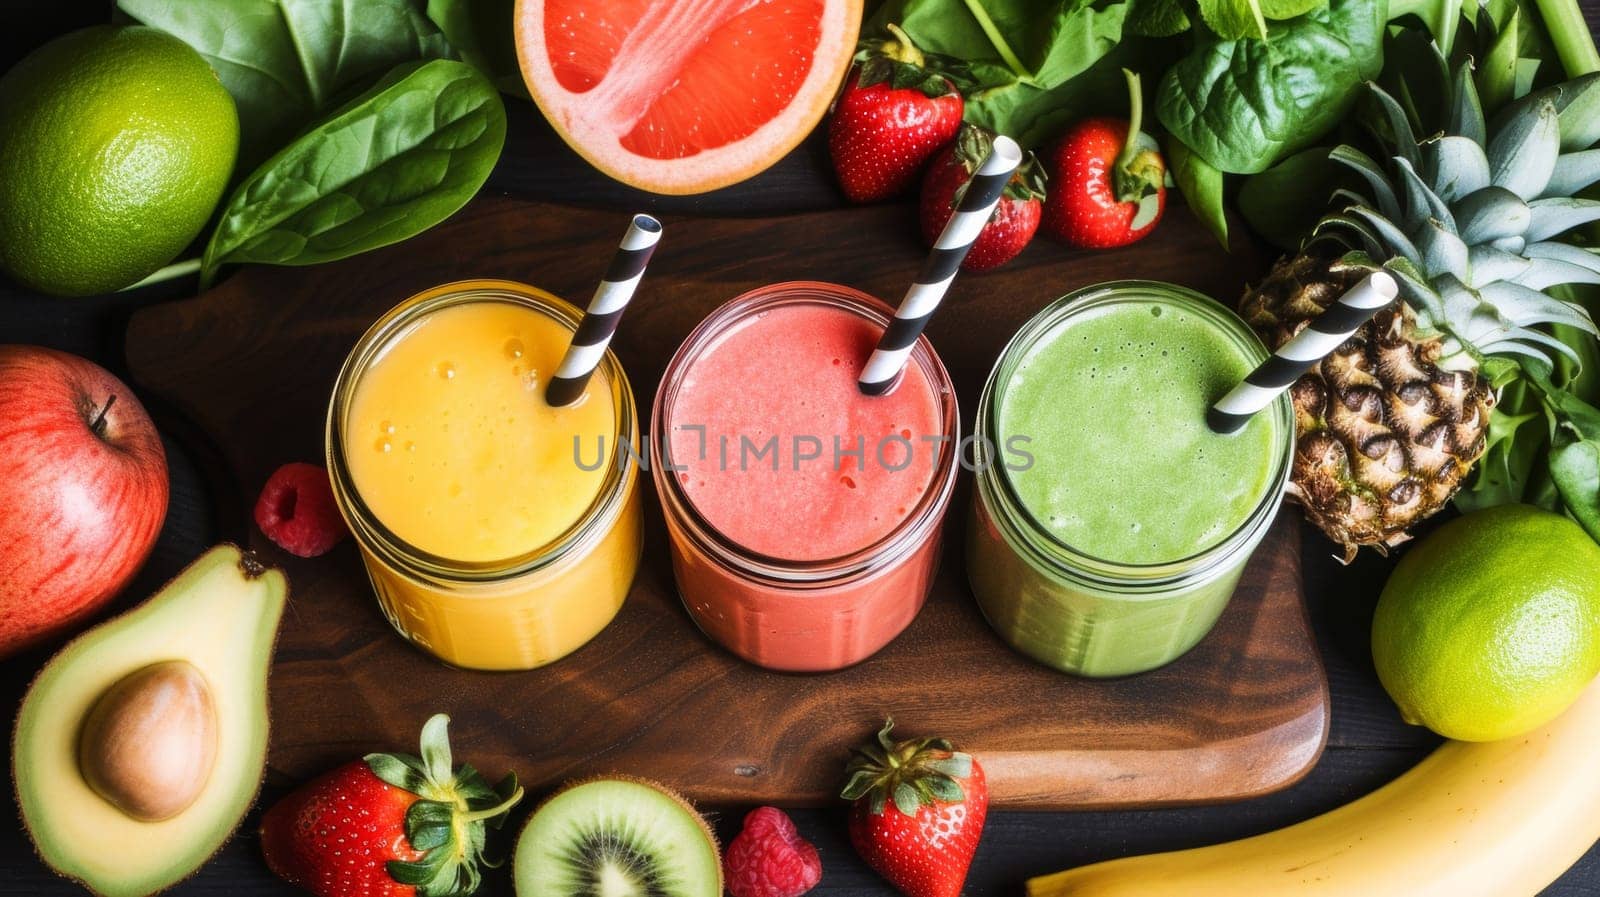 Three smoothies are displayed on a cutting board with fruit